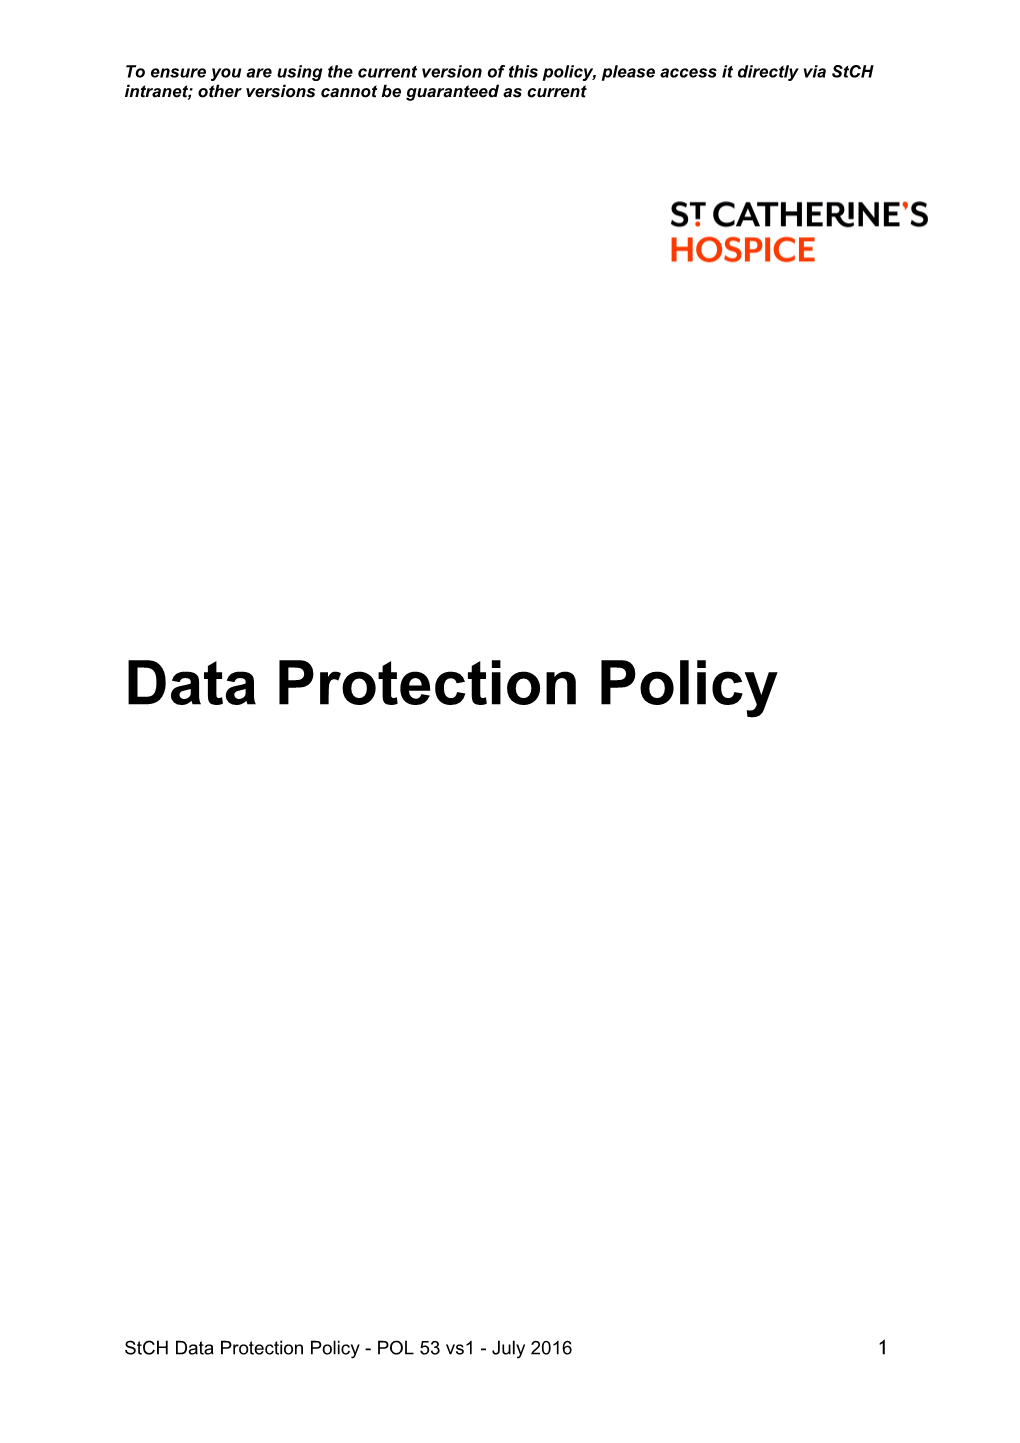 To Ensure You Are Using the Current Version of This Policy, Please Access It Directly